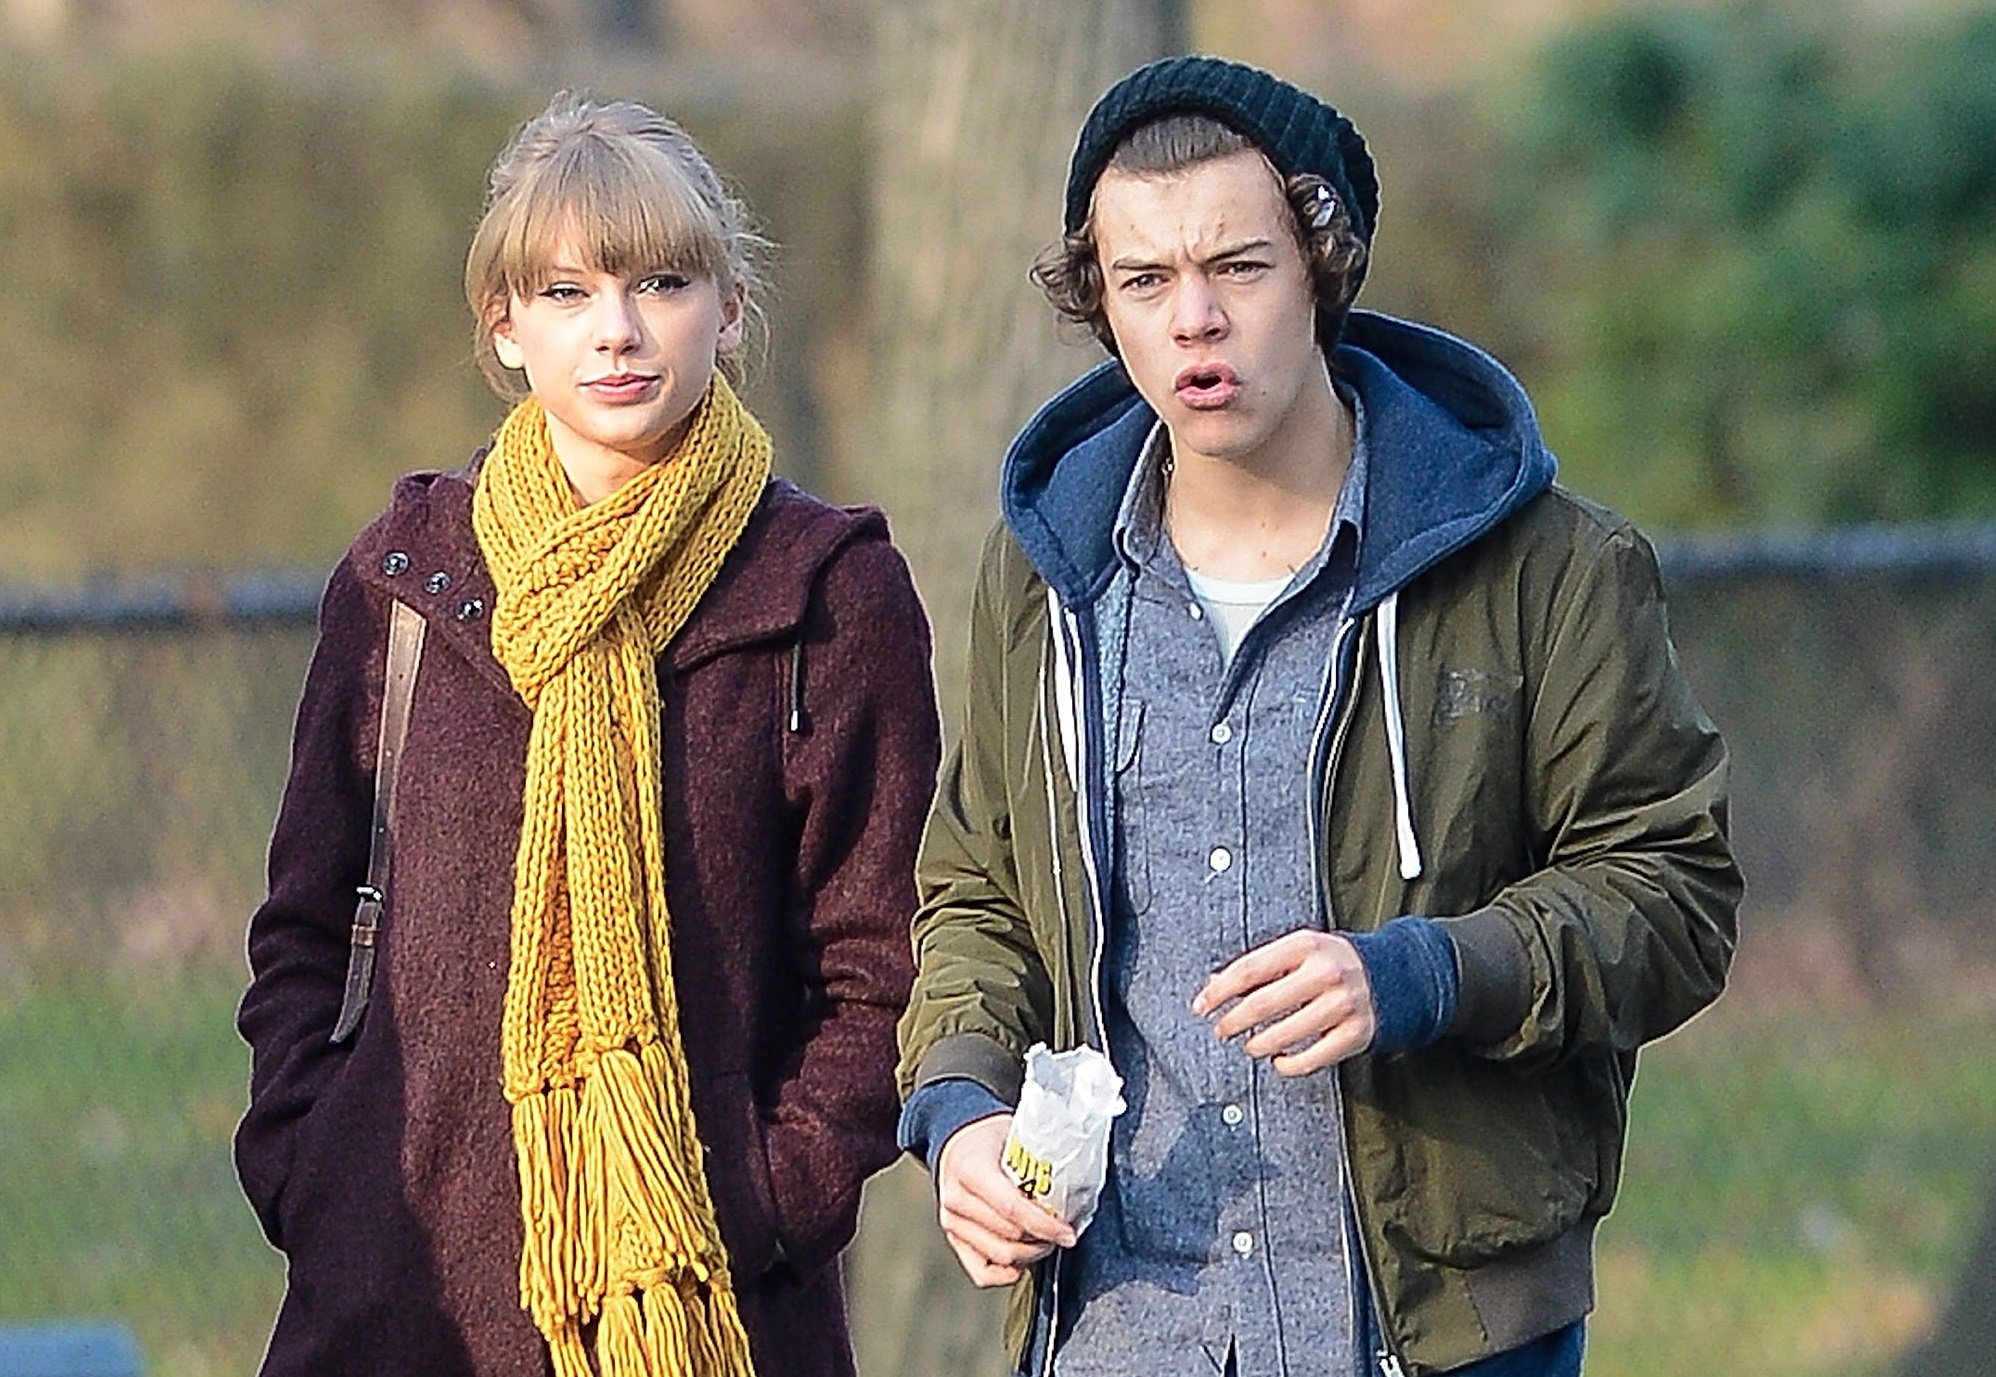 Taylor Swift's Most Popular Songs About Harry Styles